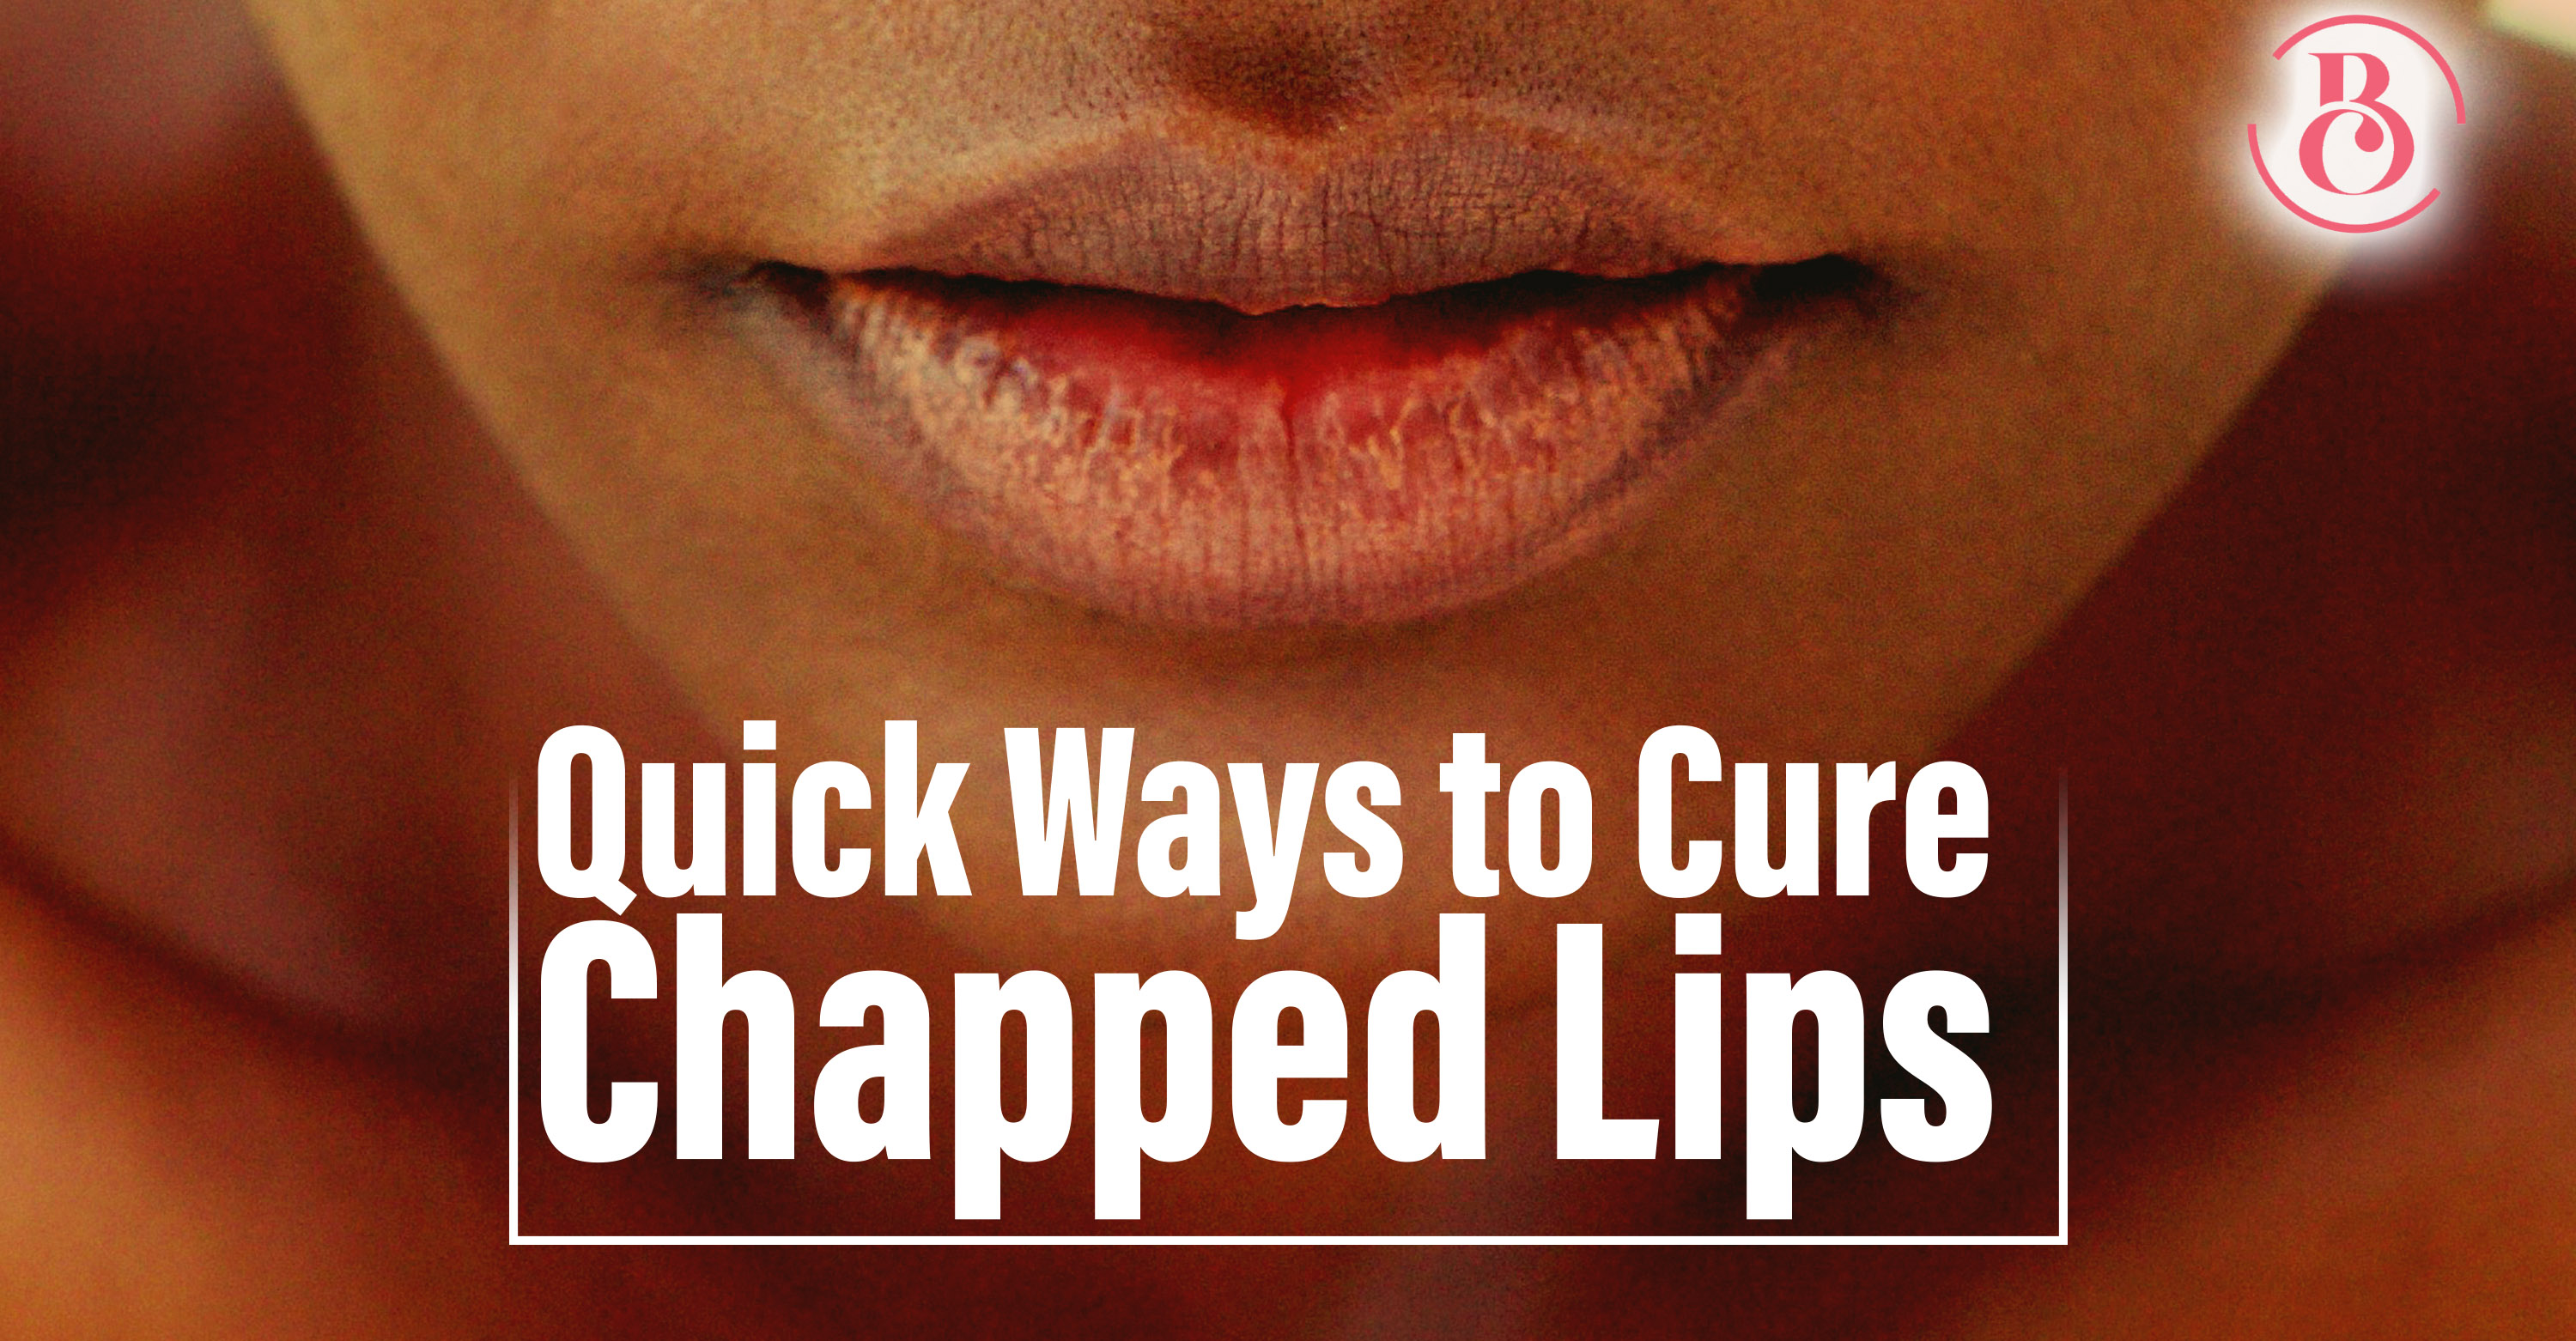 10 Quick Ways to Treat Chapped Lips